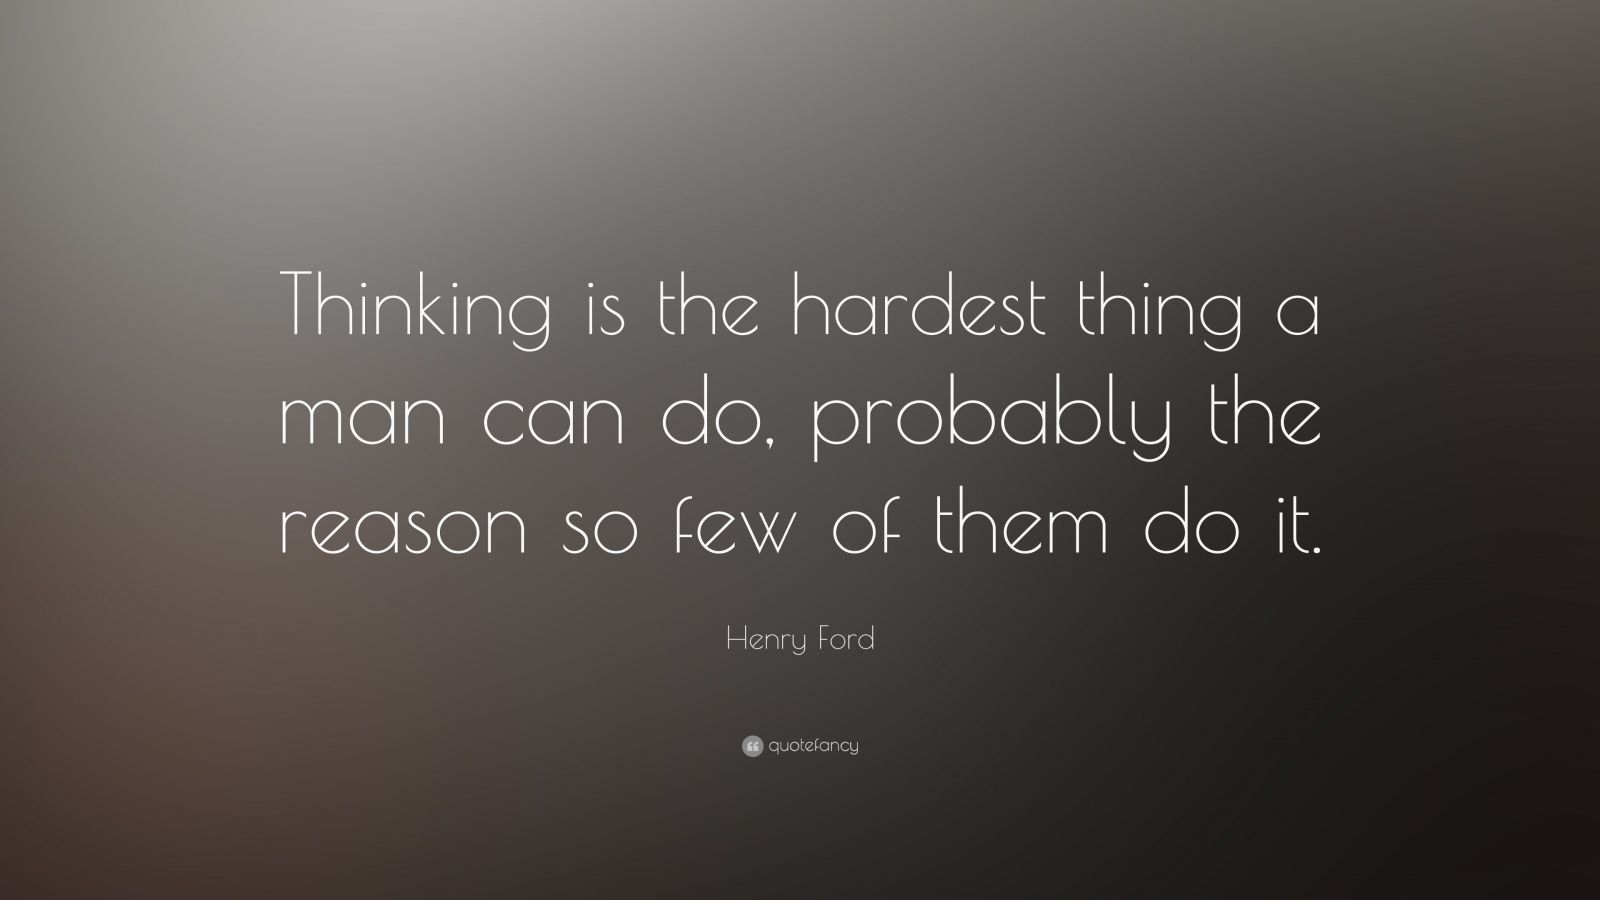 Henry ford quote thinking is the hardest work #4